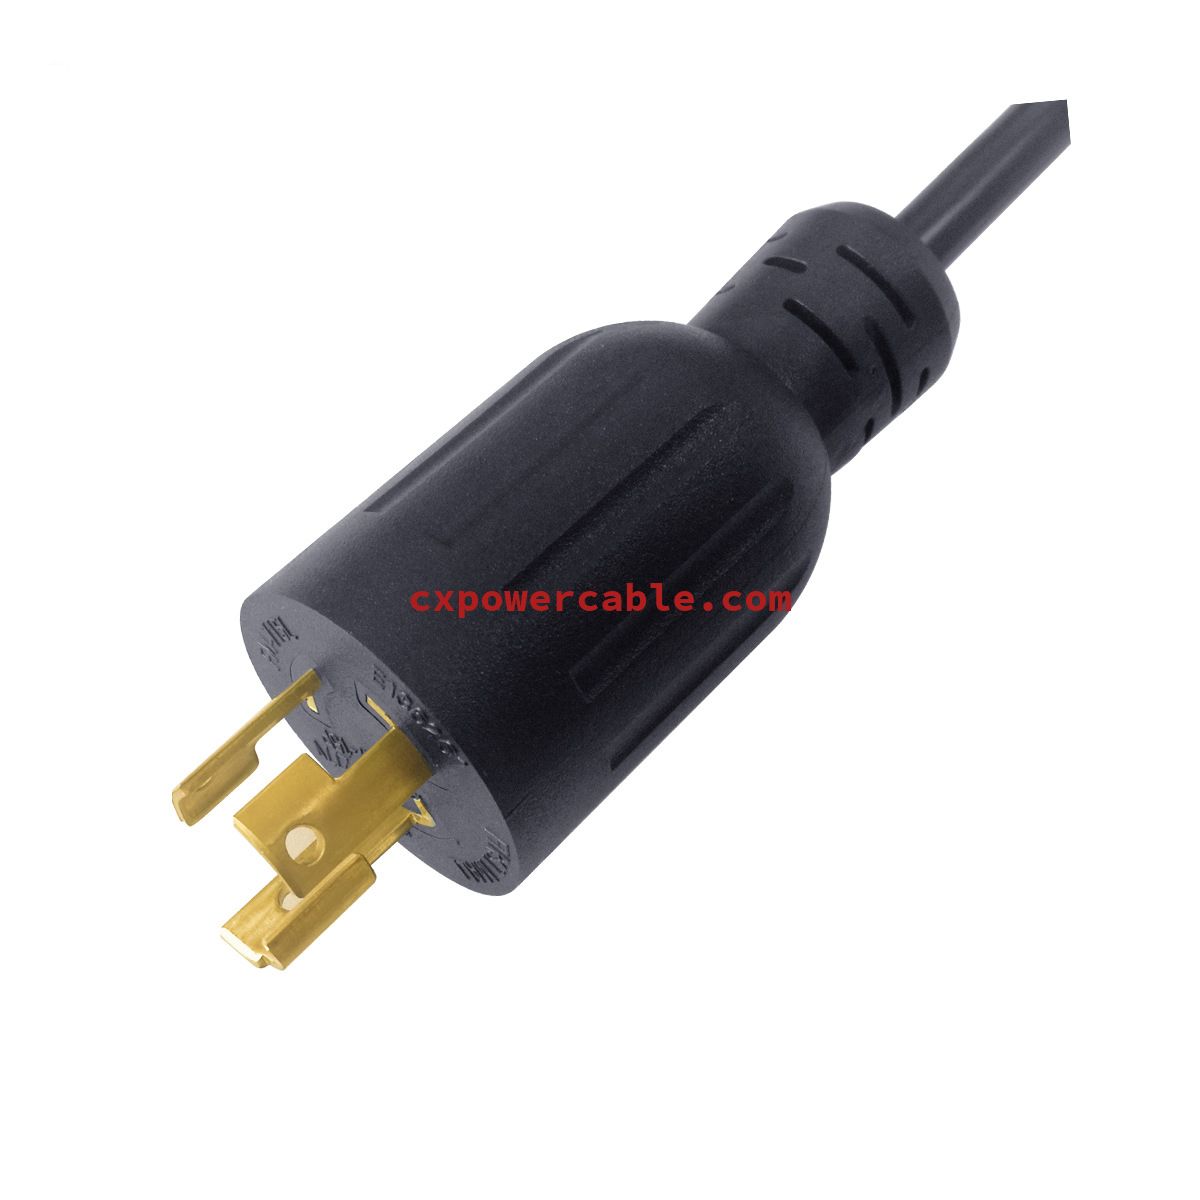 L7-15P American standard 3-prong AC power cord high power 277V American lock industrial plug cable